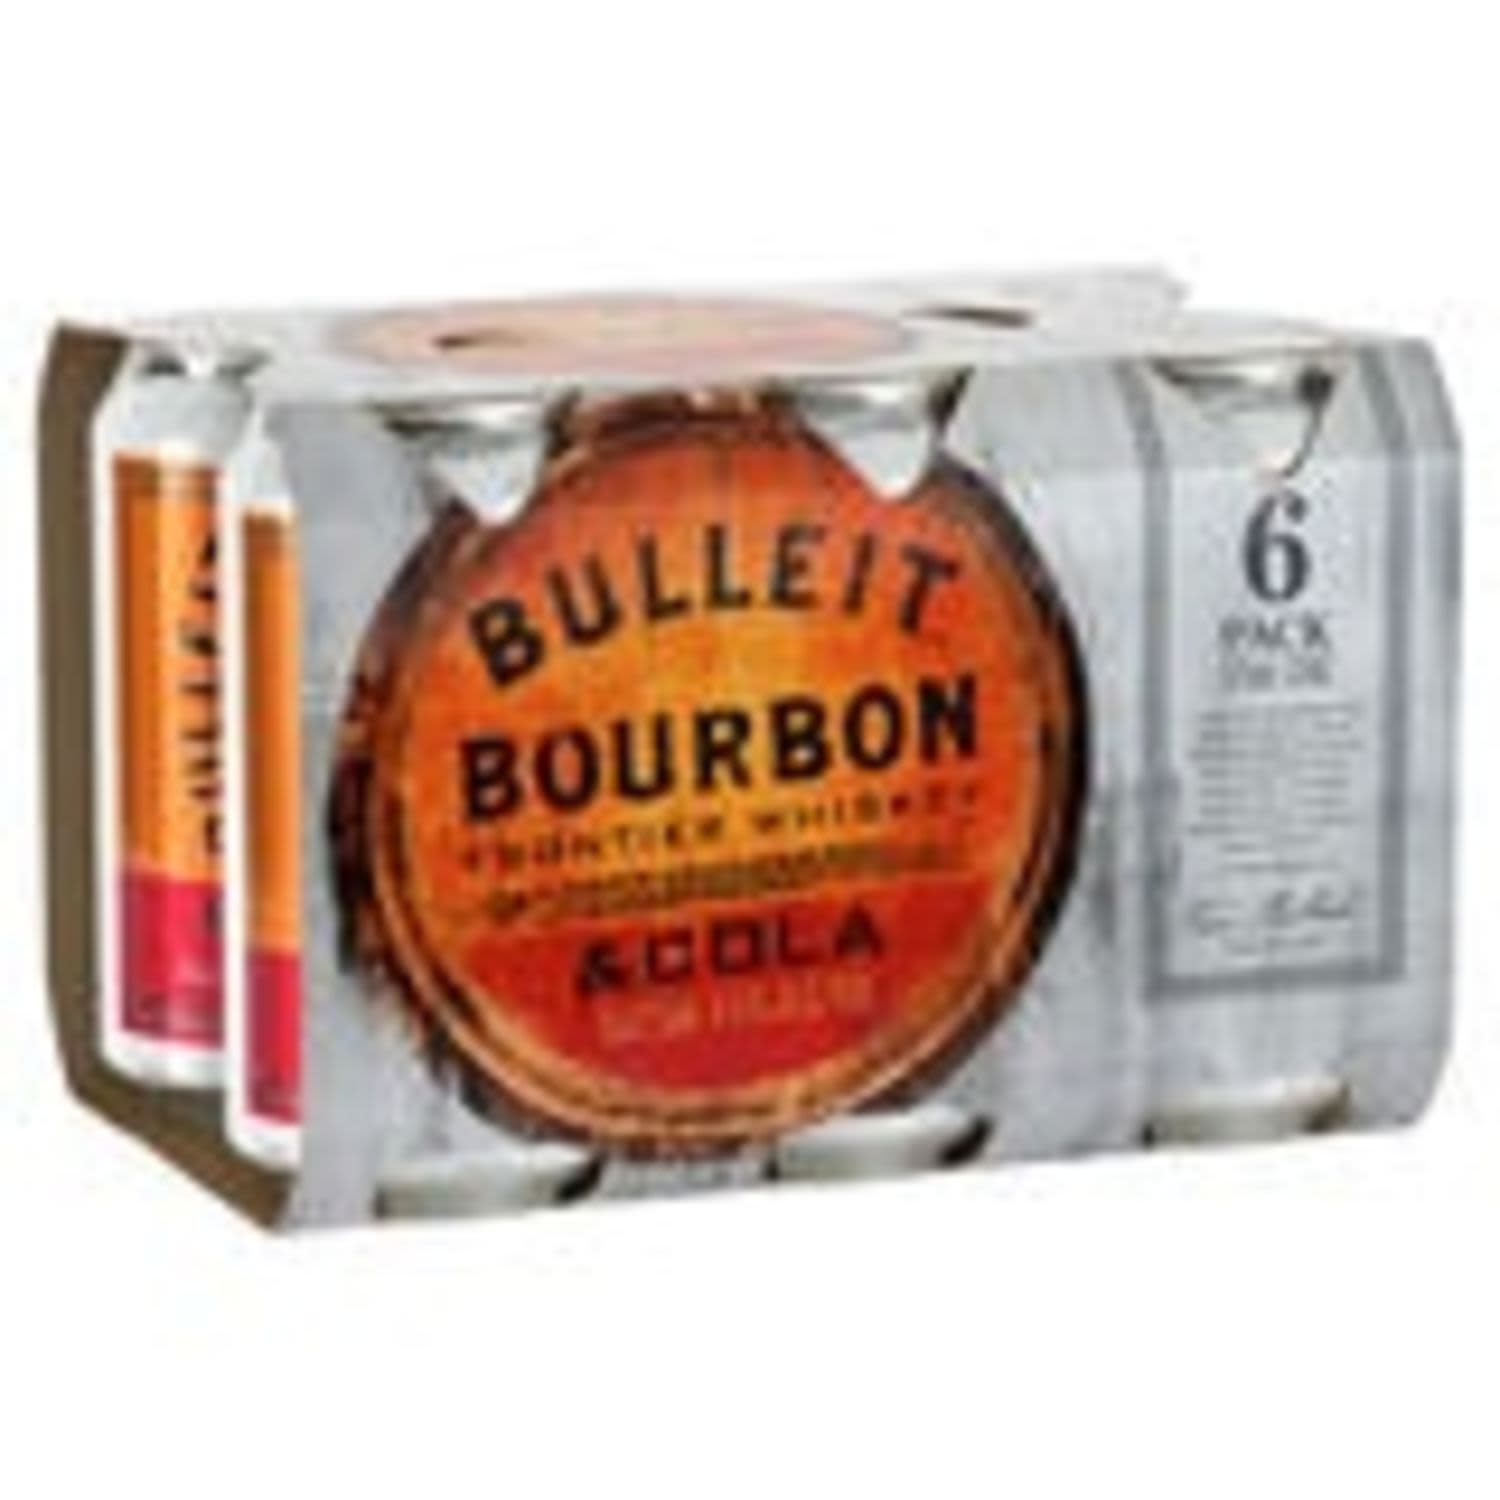 Bulleit Bourbon and Cola 4.5% Can 375mL 6 Pack